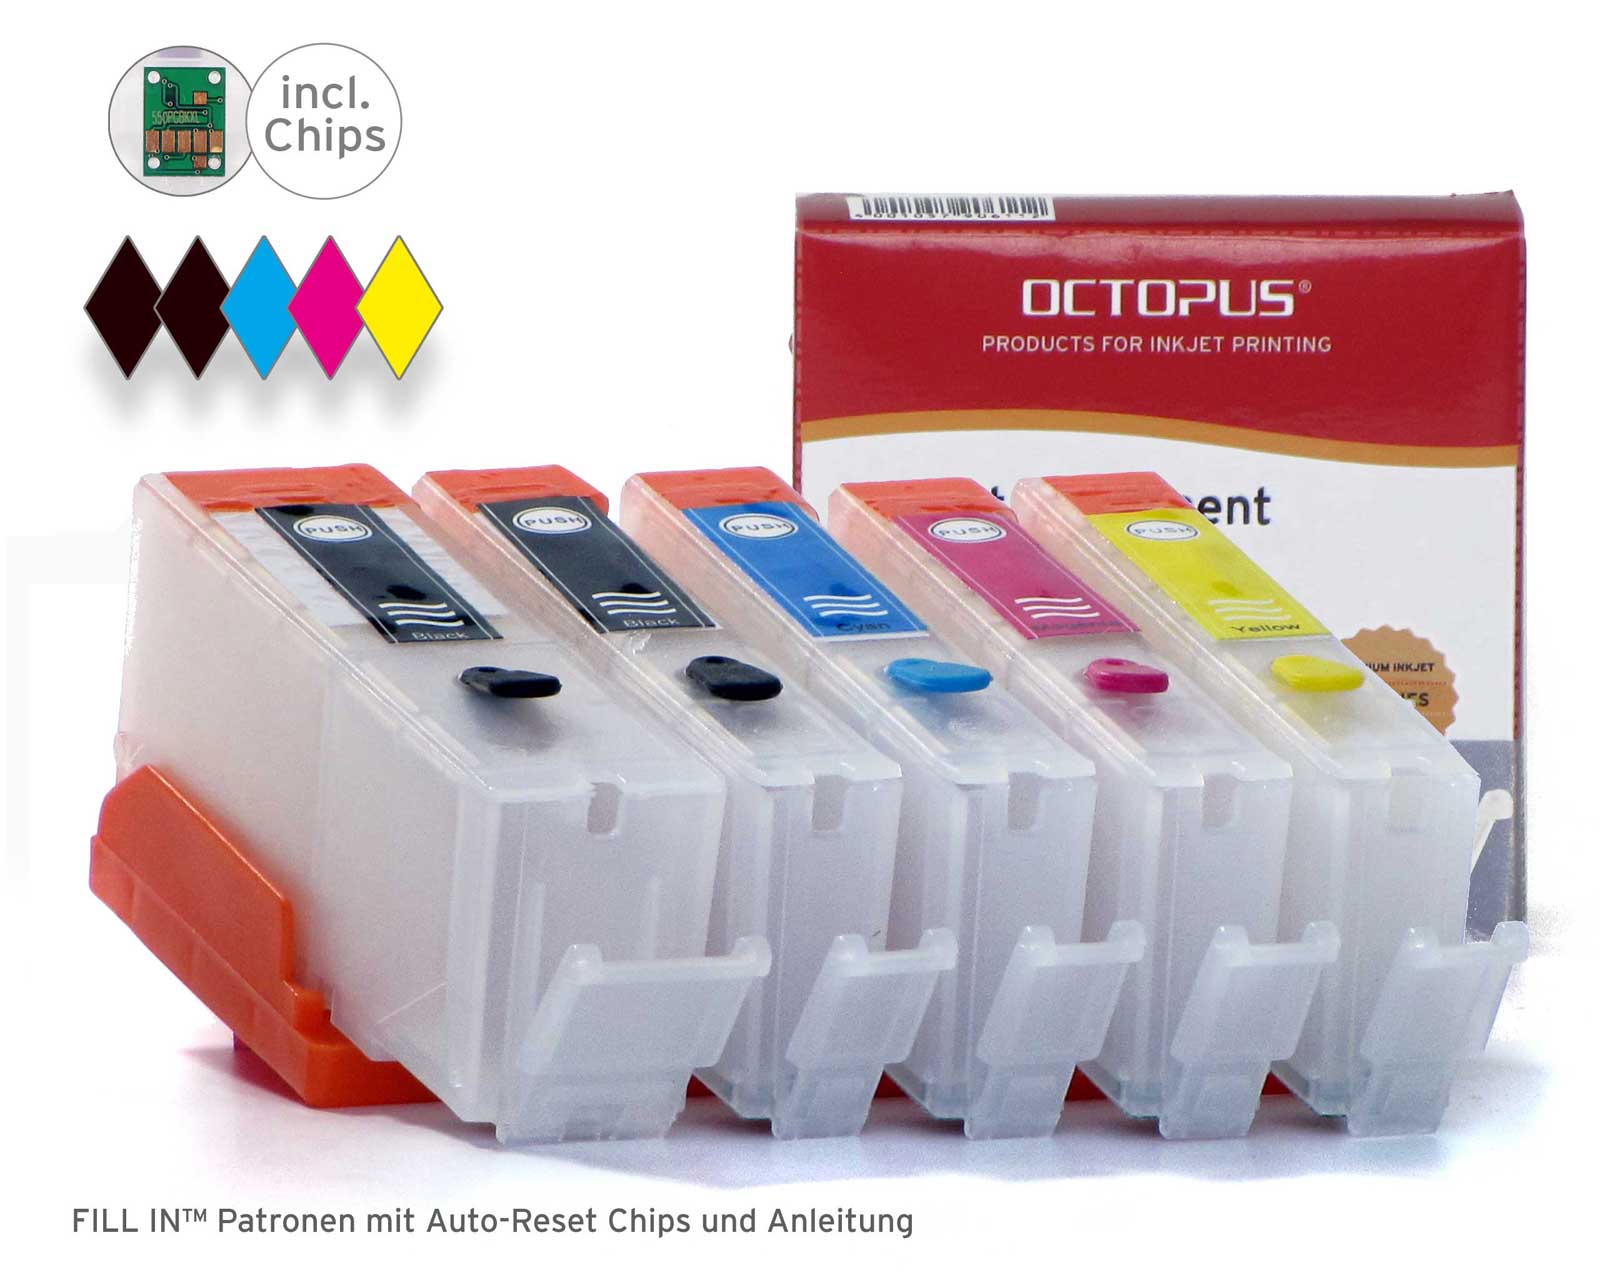 Refillable cartridges for Canon PGI-270, CLI-271 with autoreset chips